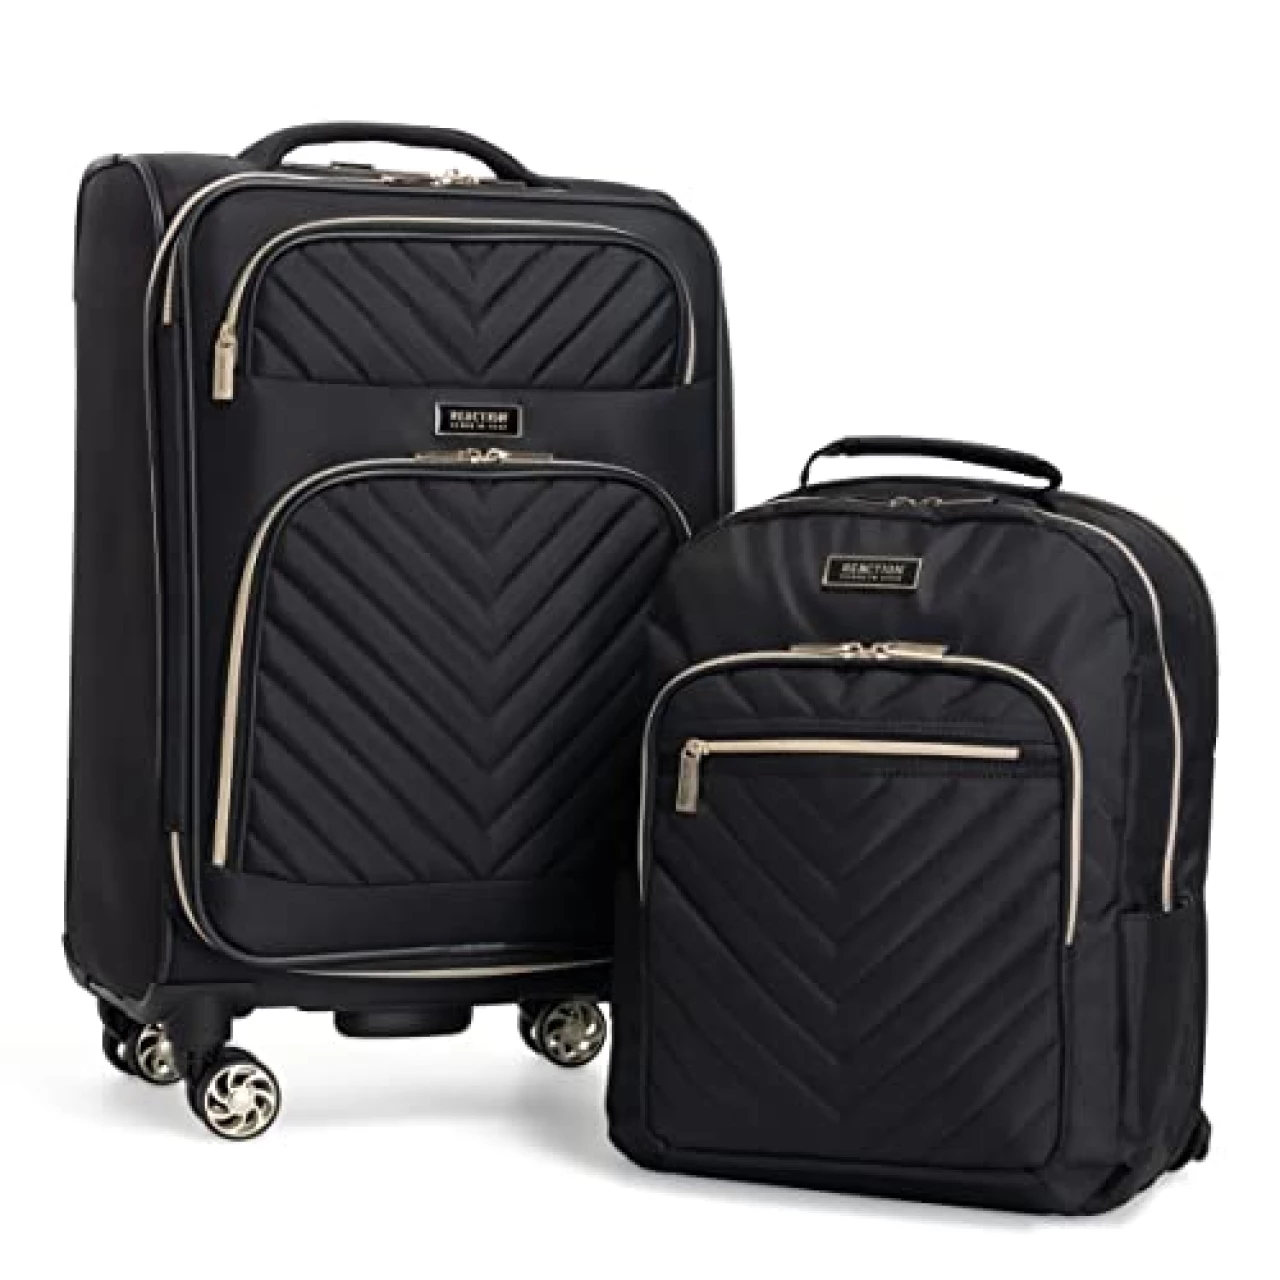 Kenneth Cole Reaction Chelsea Luggage Chevron, Black, 2pc Bundle (Carry On+Backpack)